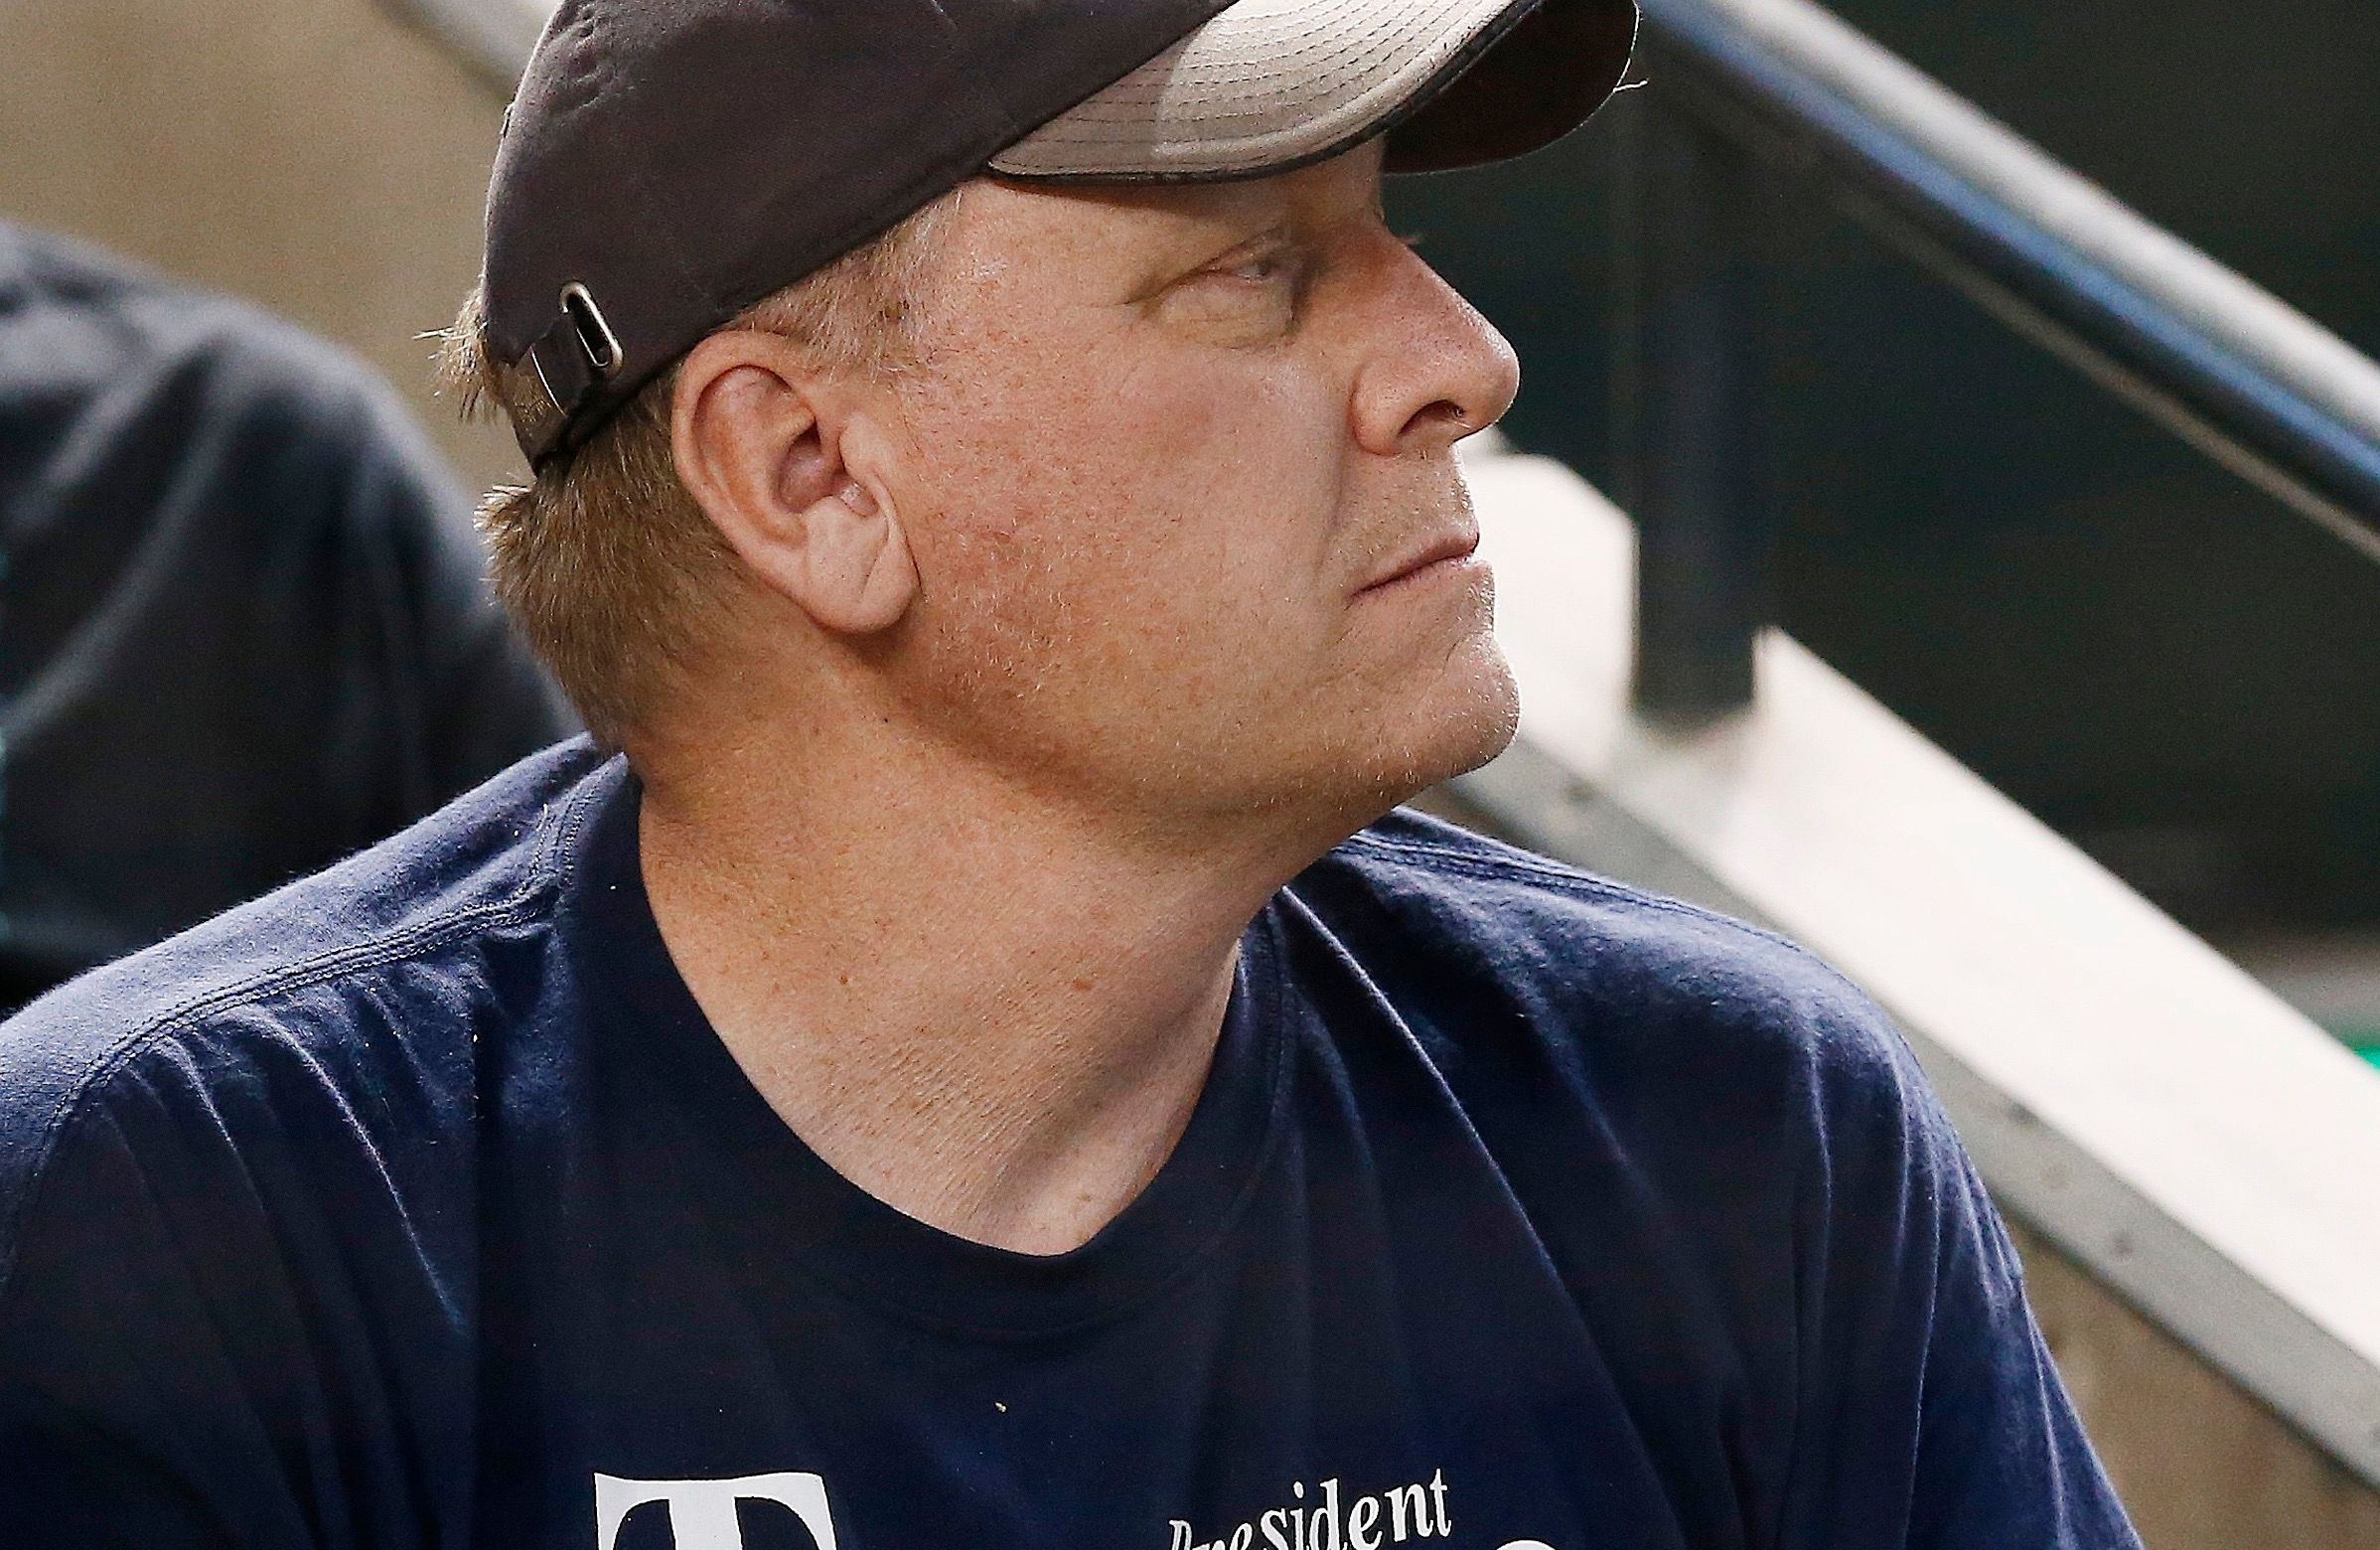 Curt Schilling falls 16 votes short of Baseball Hall of Fame induction -  The Boston Globe